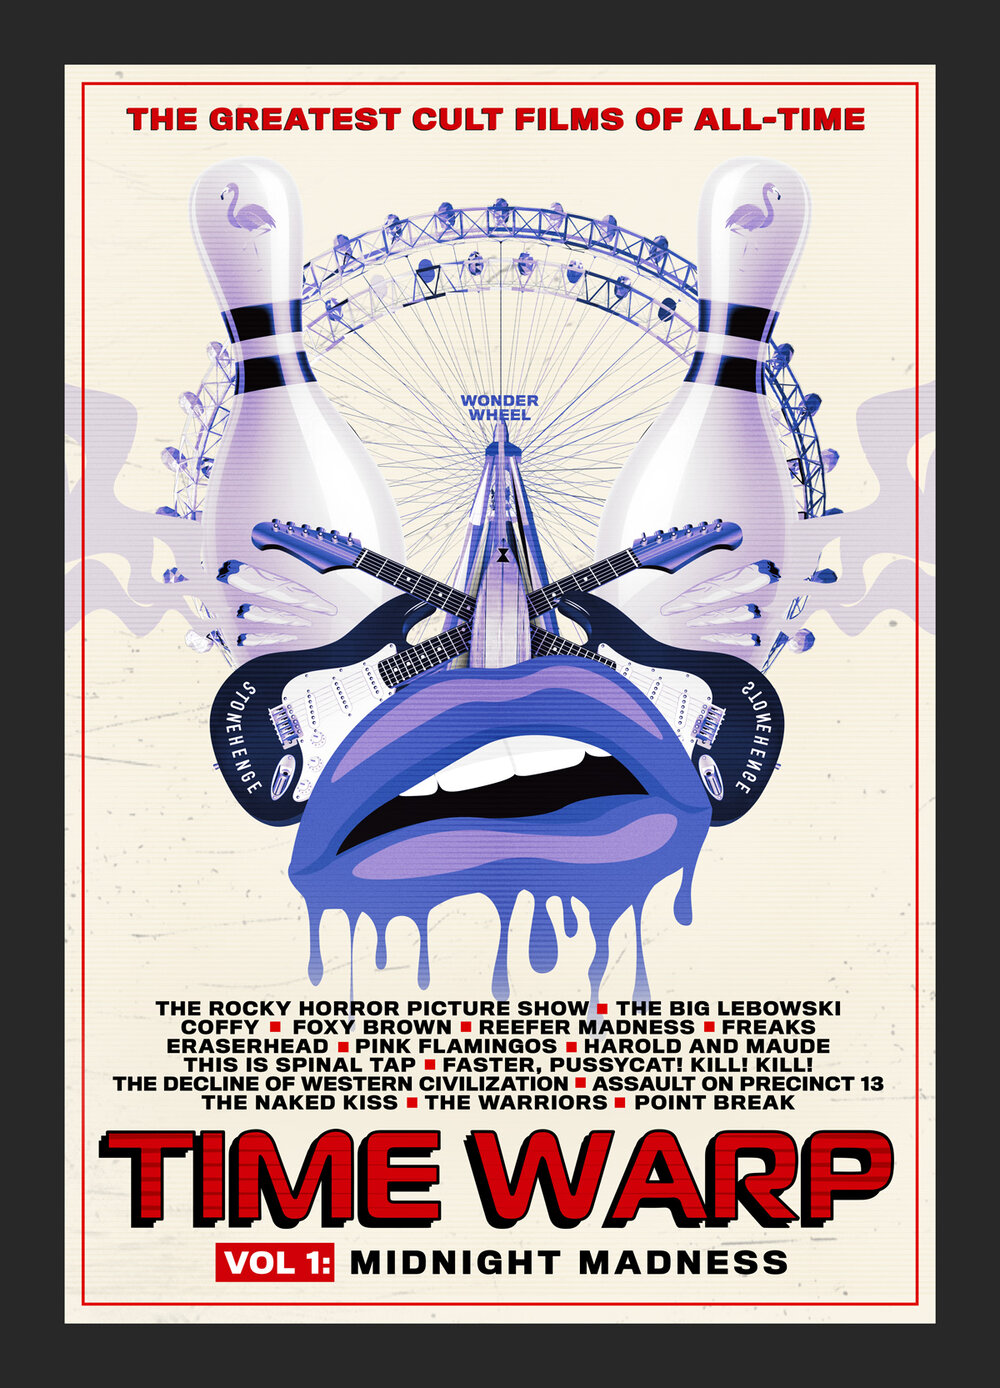 Time Warp: The Greatest Cult Films Of All-time- Vol. 3 Comedy And Camp